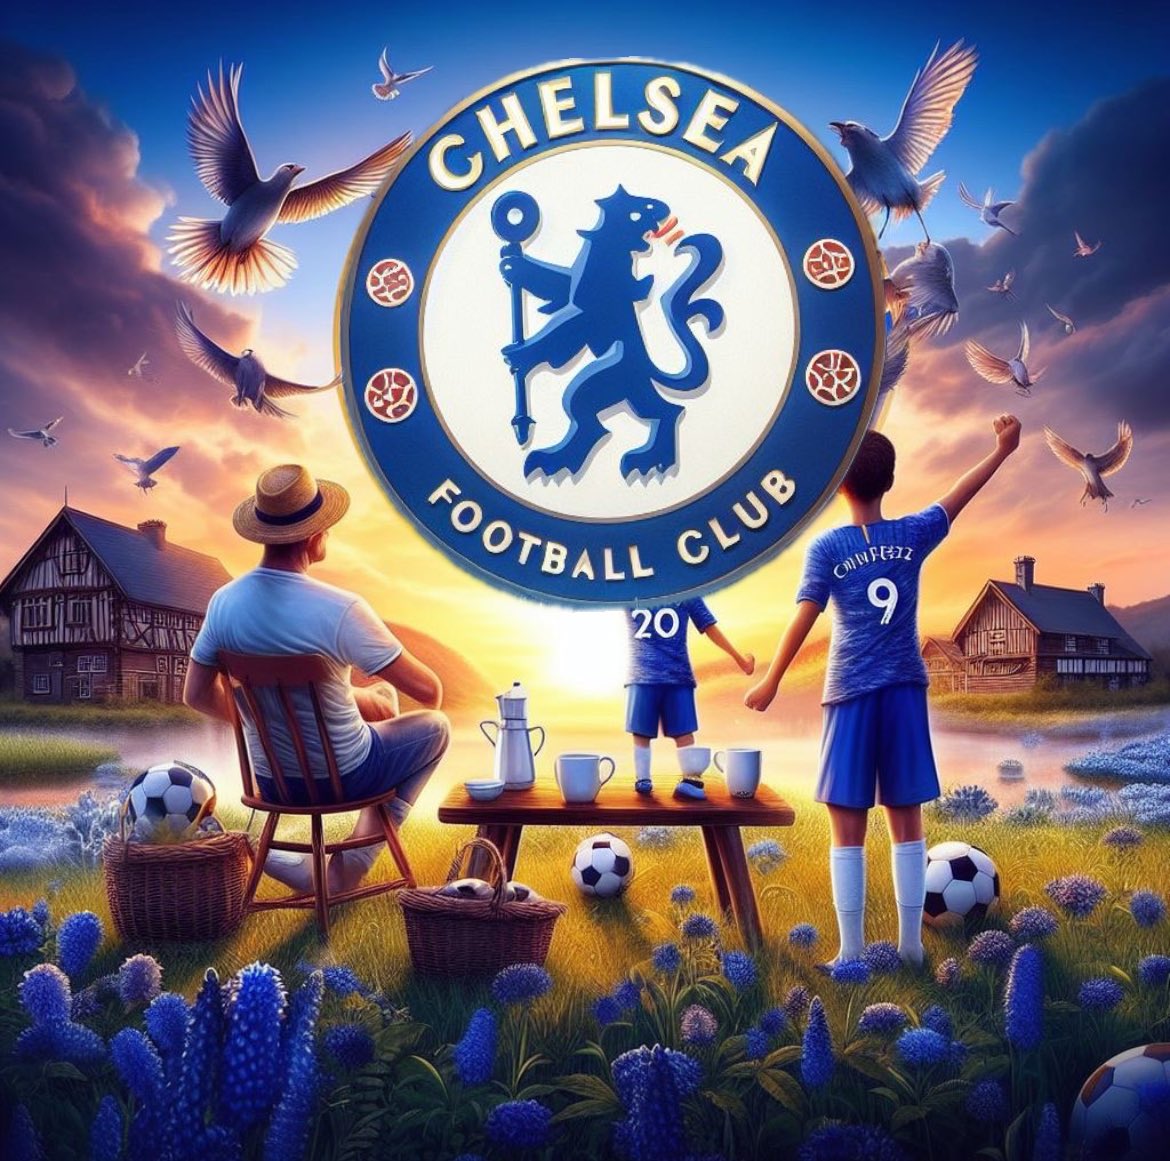 Top of the morning, #CFC family! ☕ Wishing all you lovely supporters a day as brilliant as our club’s history. 

Here’s to chasing glory on and off the pitch! 🏆💙 

#KTBFFH #ChelseaFC